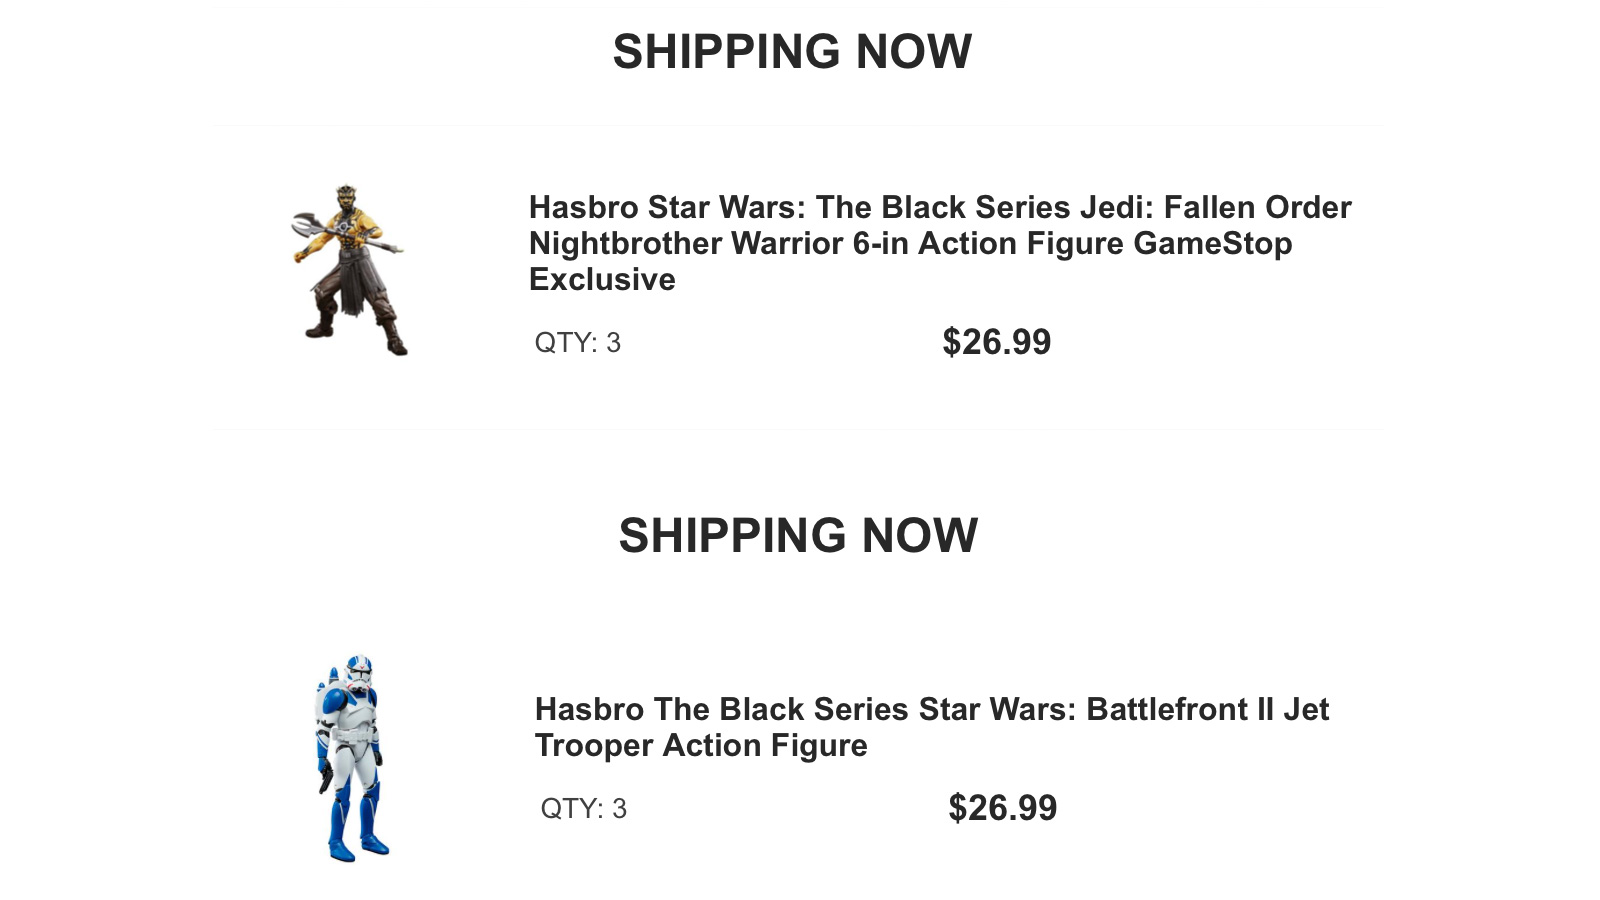 Shipping Now From GameStop.com - Exclusive TBS 6-Inch Gaming Greats Jet Trooper And Nightbrother Warrior Figures - Preorders Still Available